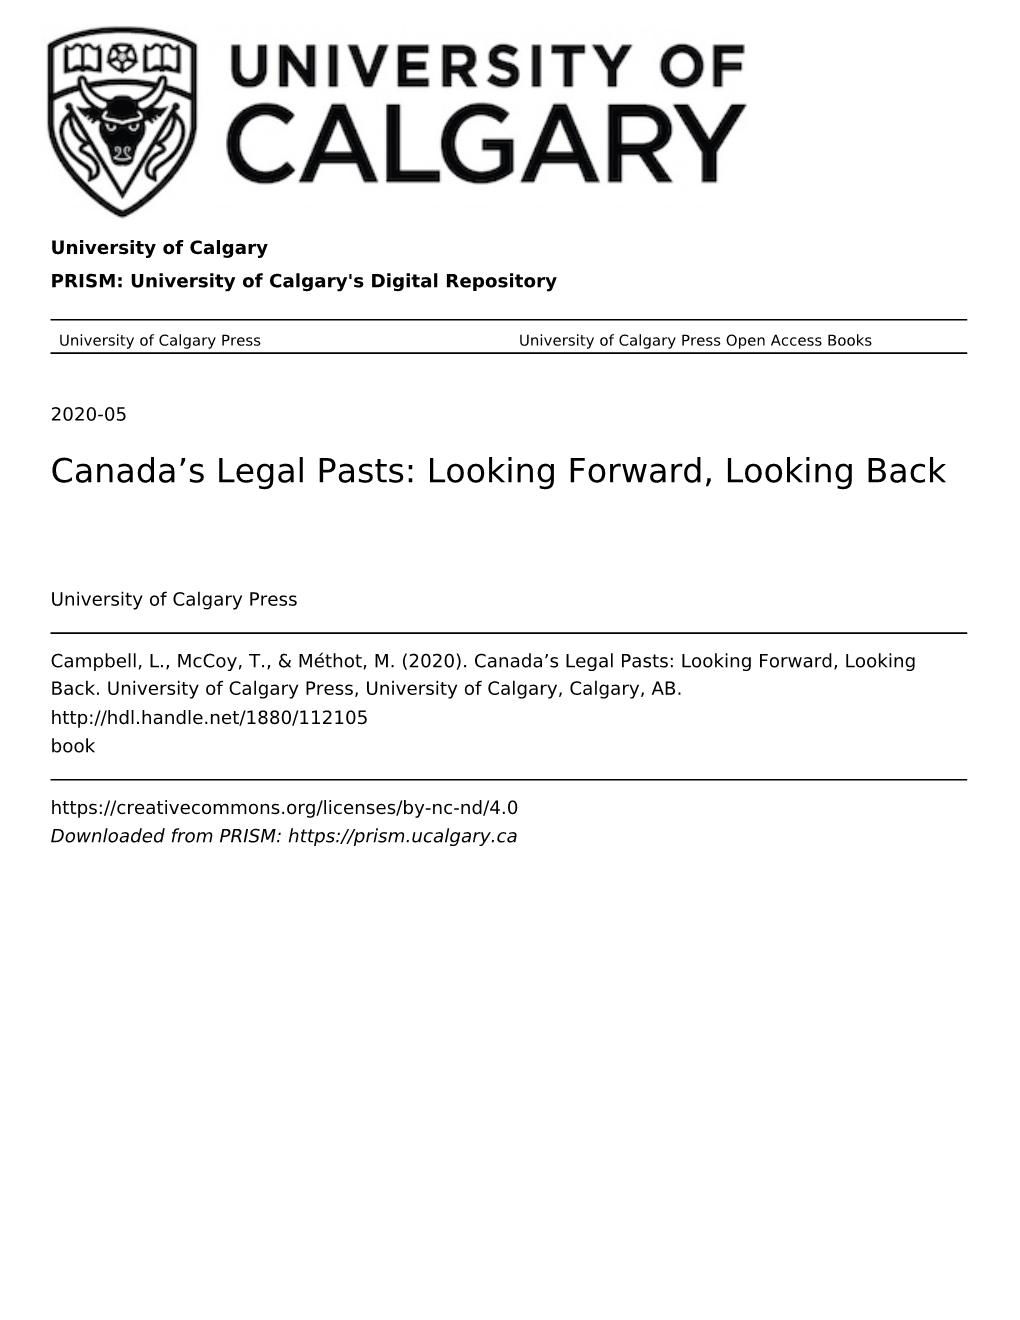 Canada's Legal Pasts